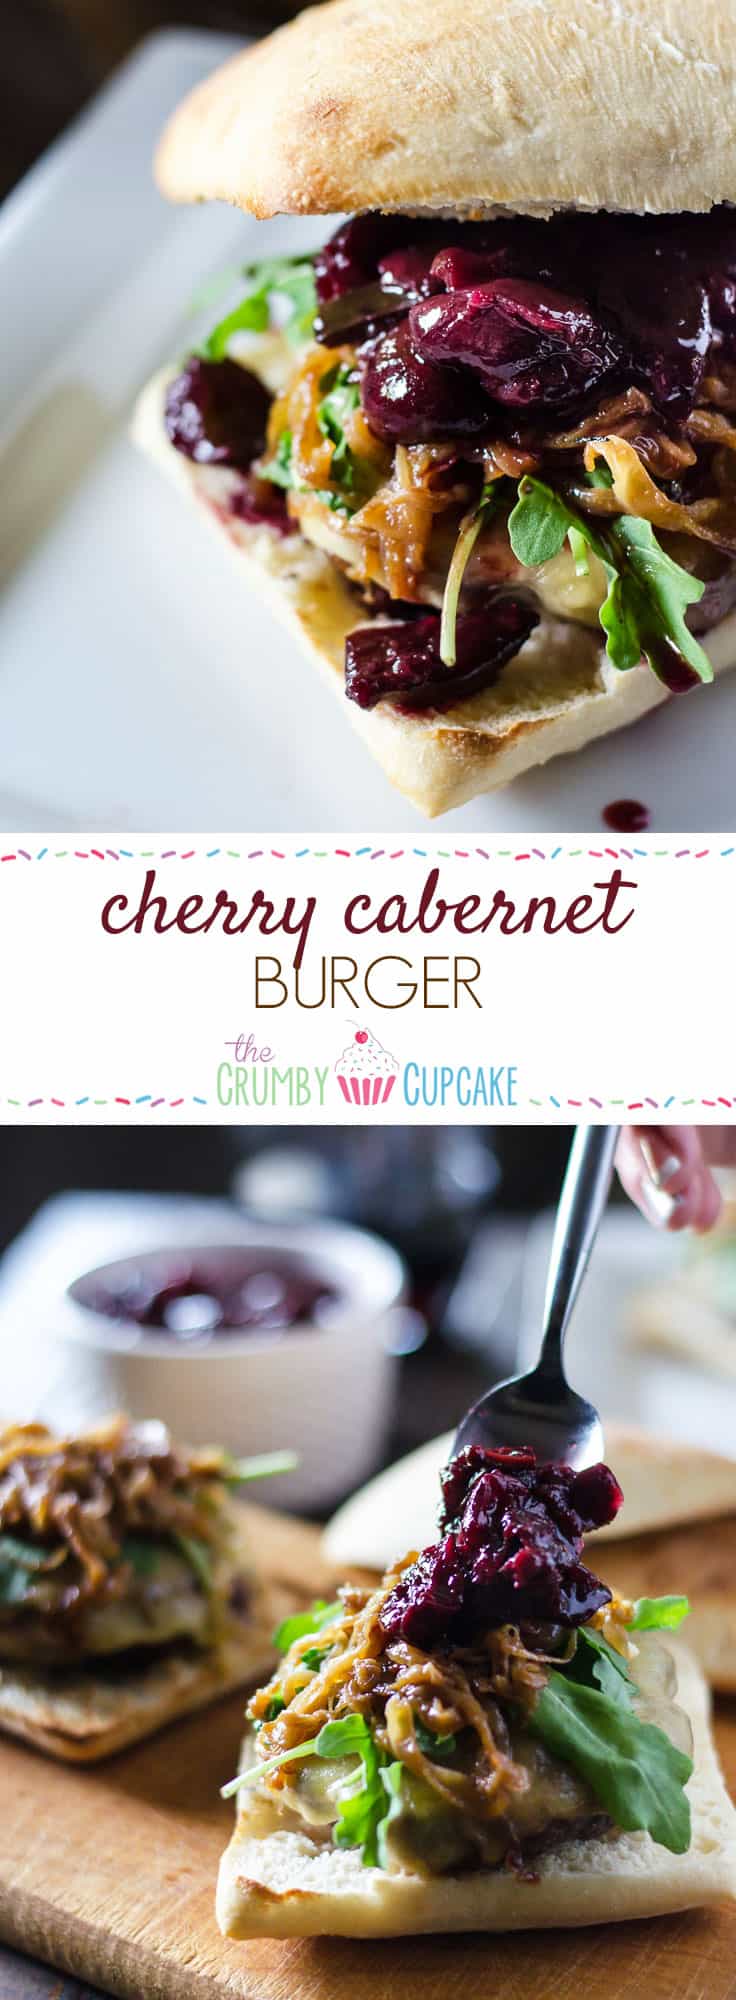 Get fancy with your grillin' and sink your teeth into a Cherry Cabernet Burger! Bacon and Cabernet-infused beef patties, topped with melty Gouda, peppery arugula, caramelized onions, and a roasted balsamic cherry & poblano chutney. 